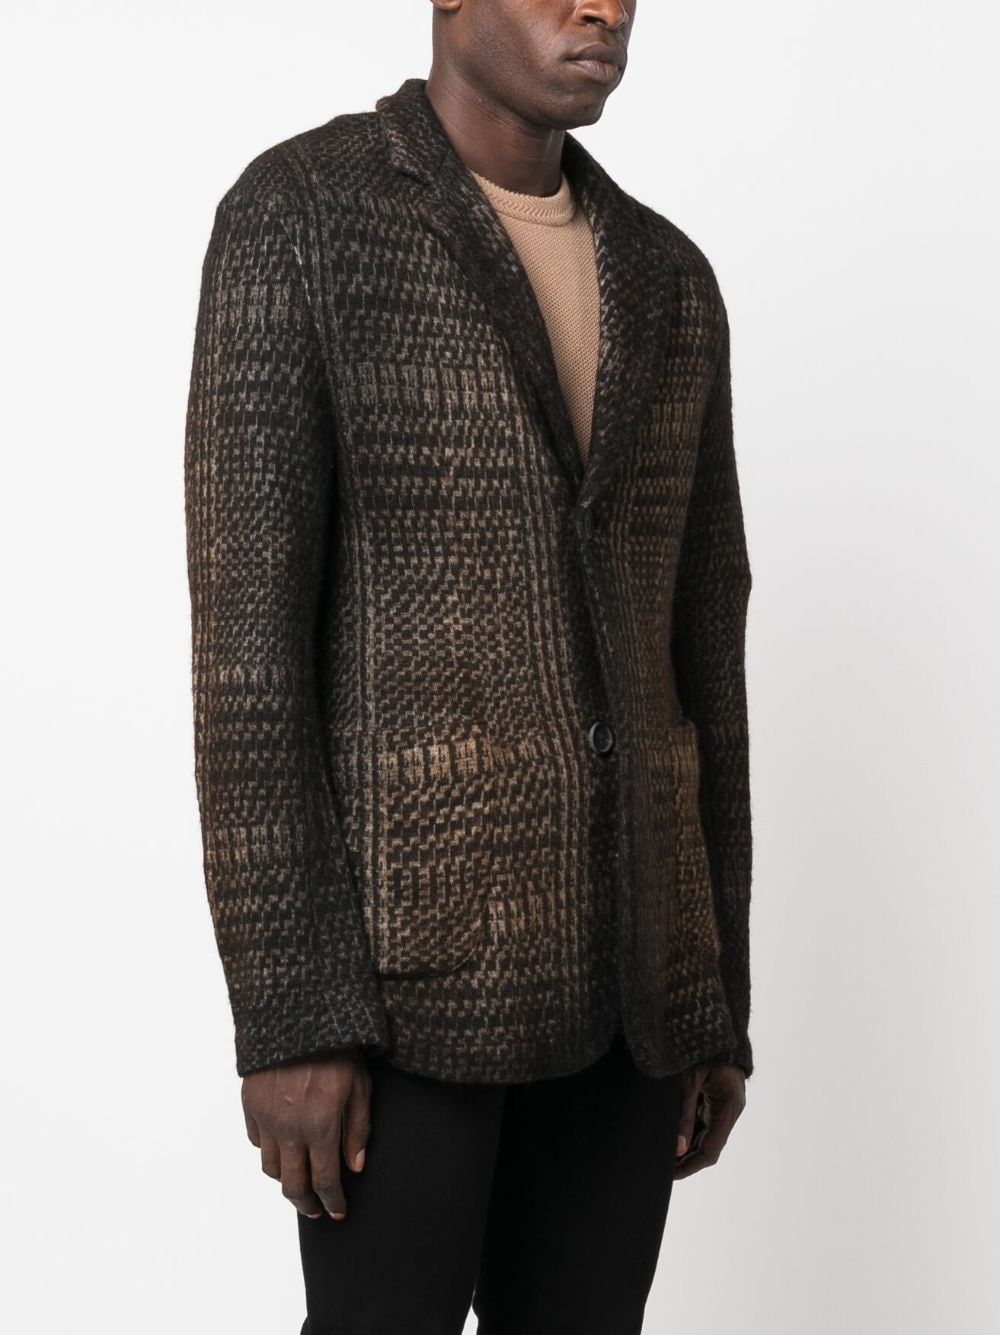 Shop Avant Toi Prince Of Wales Jacquard Rever Jacket With Shadows